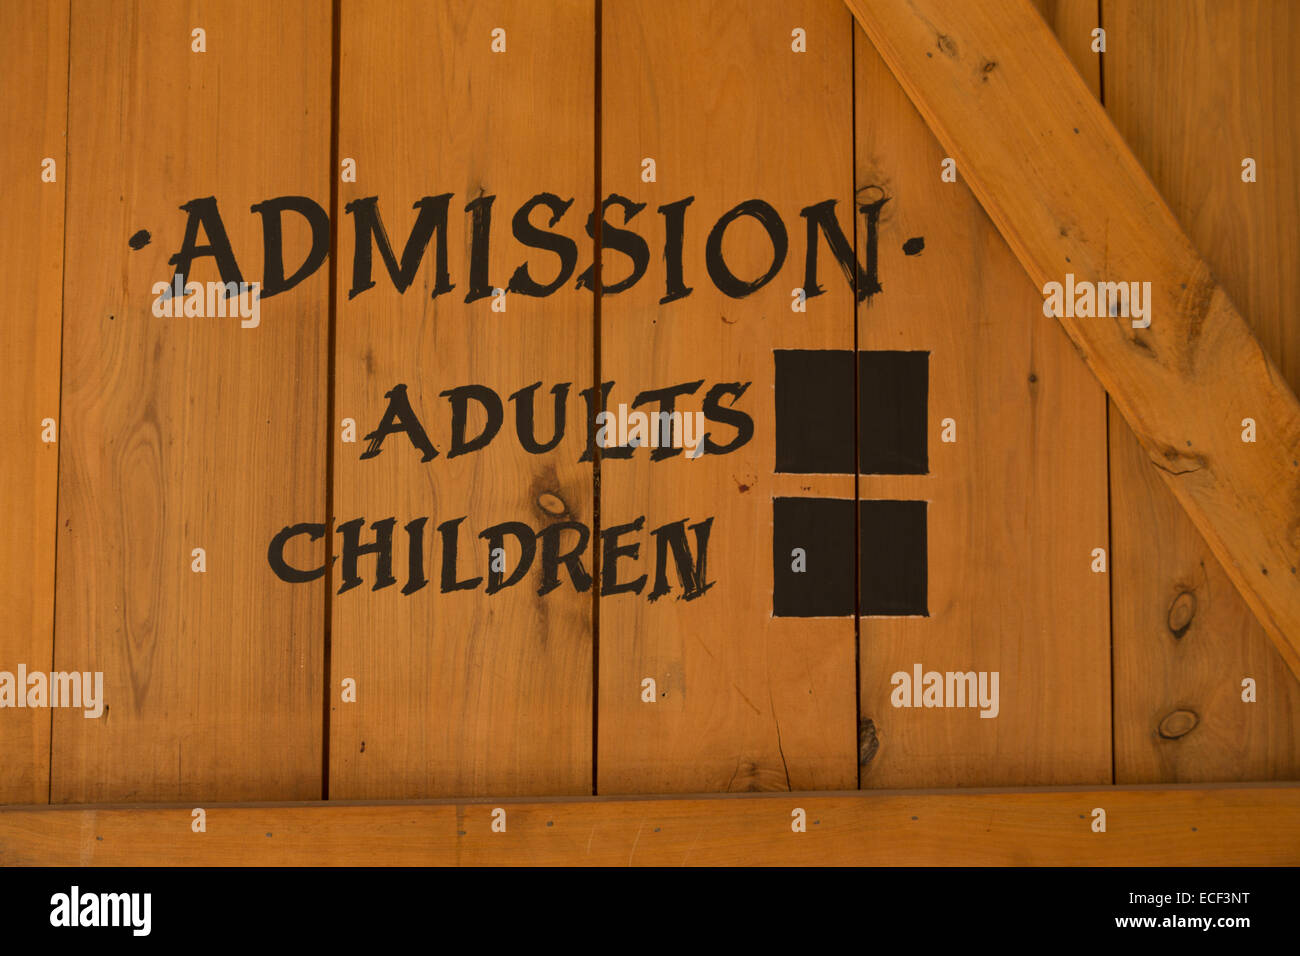 A photograph of an admission sign for adults and children on a timber door background. Stock Photo